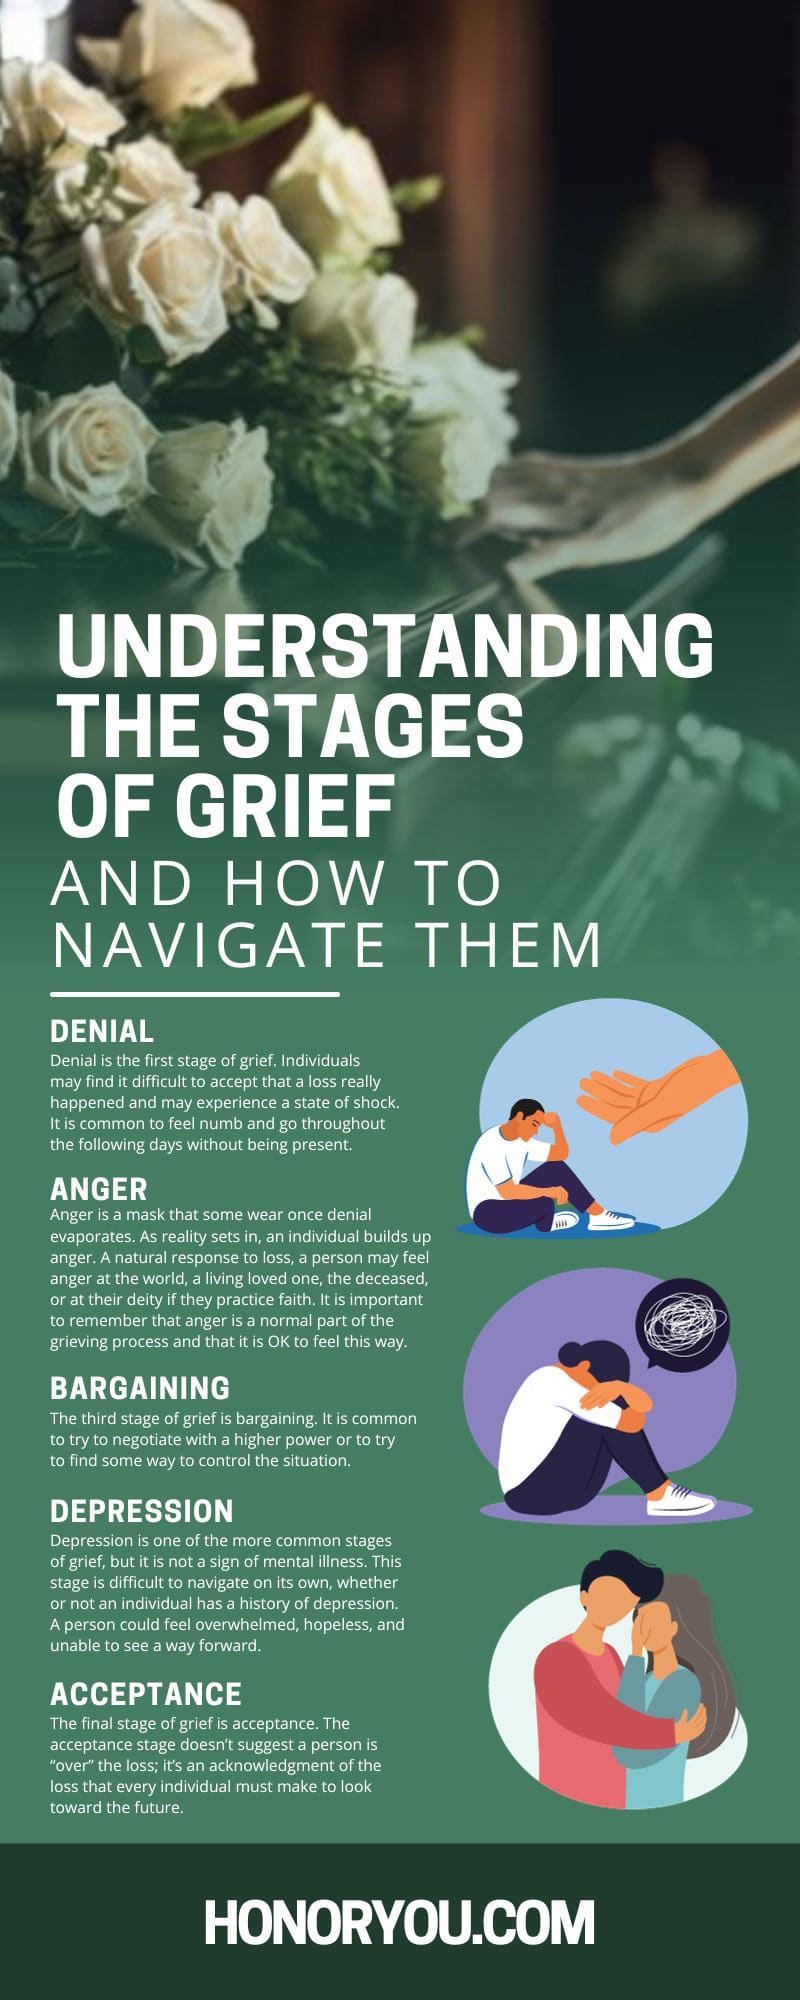 Understanding the Stages of Grief and How To Navigate Them